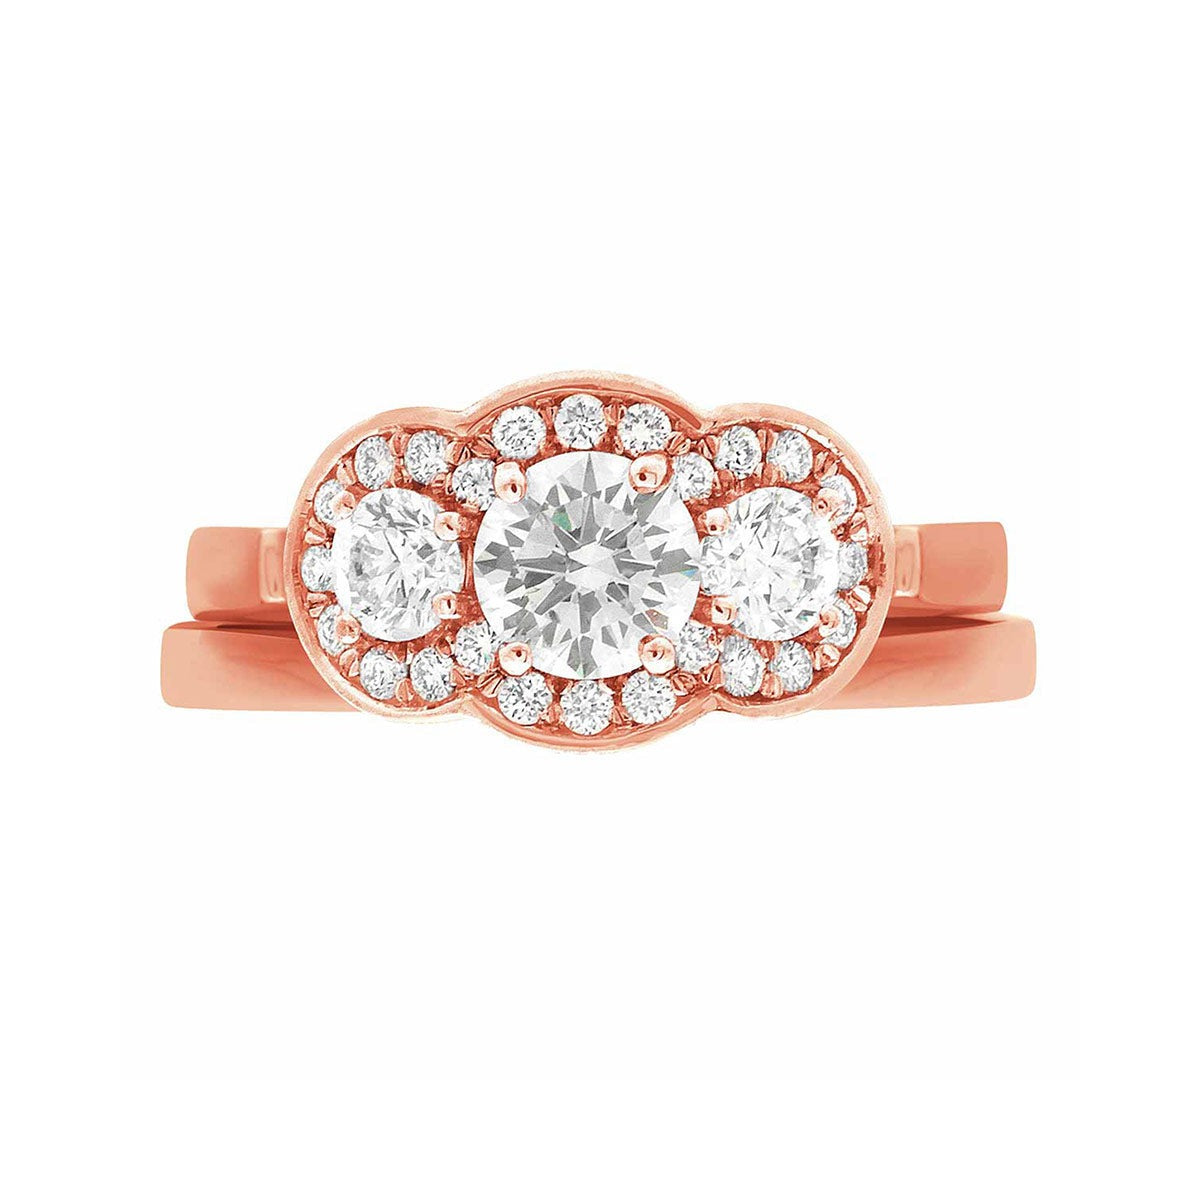 Three Halo Engagement Ring in rose gold, lying flat with a white background and featuring a matching plain wedding ring